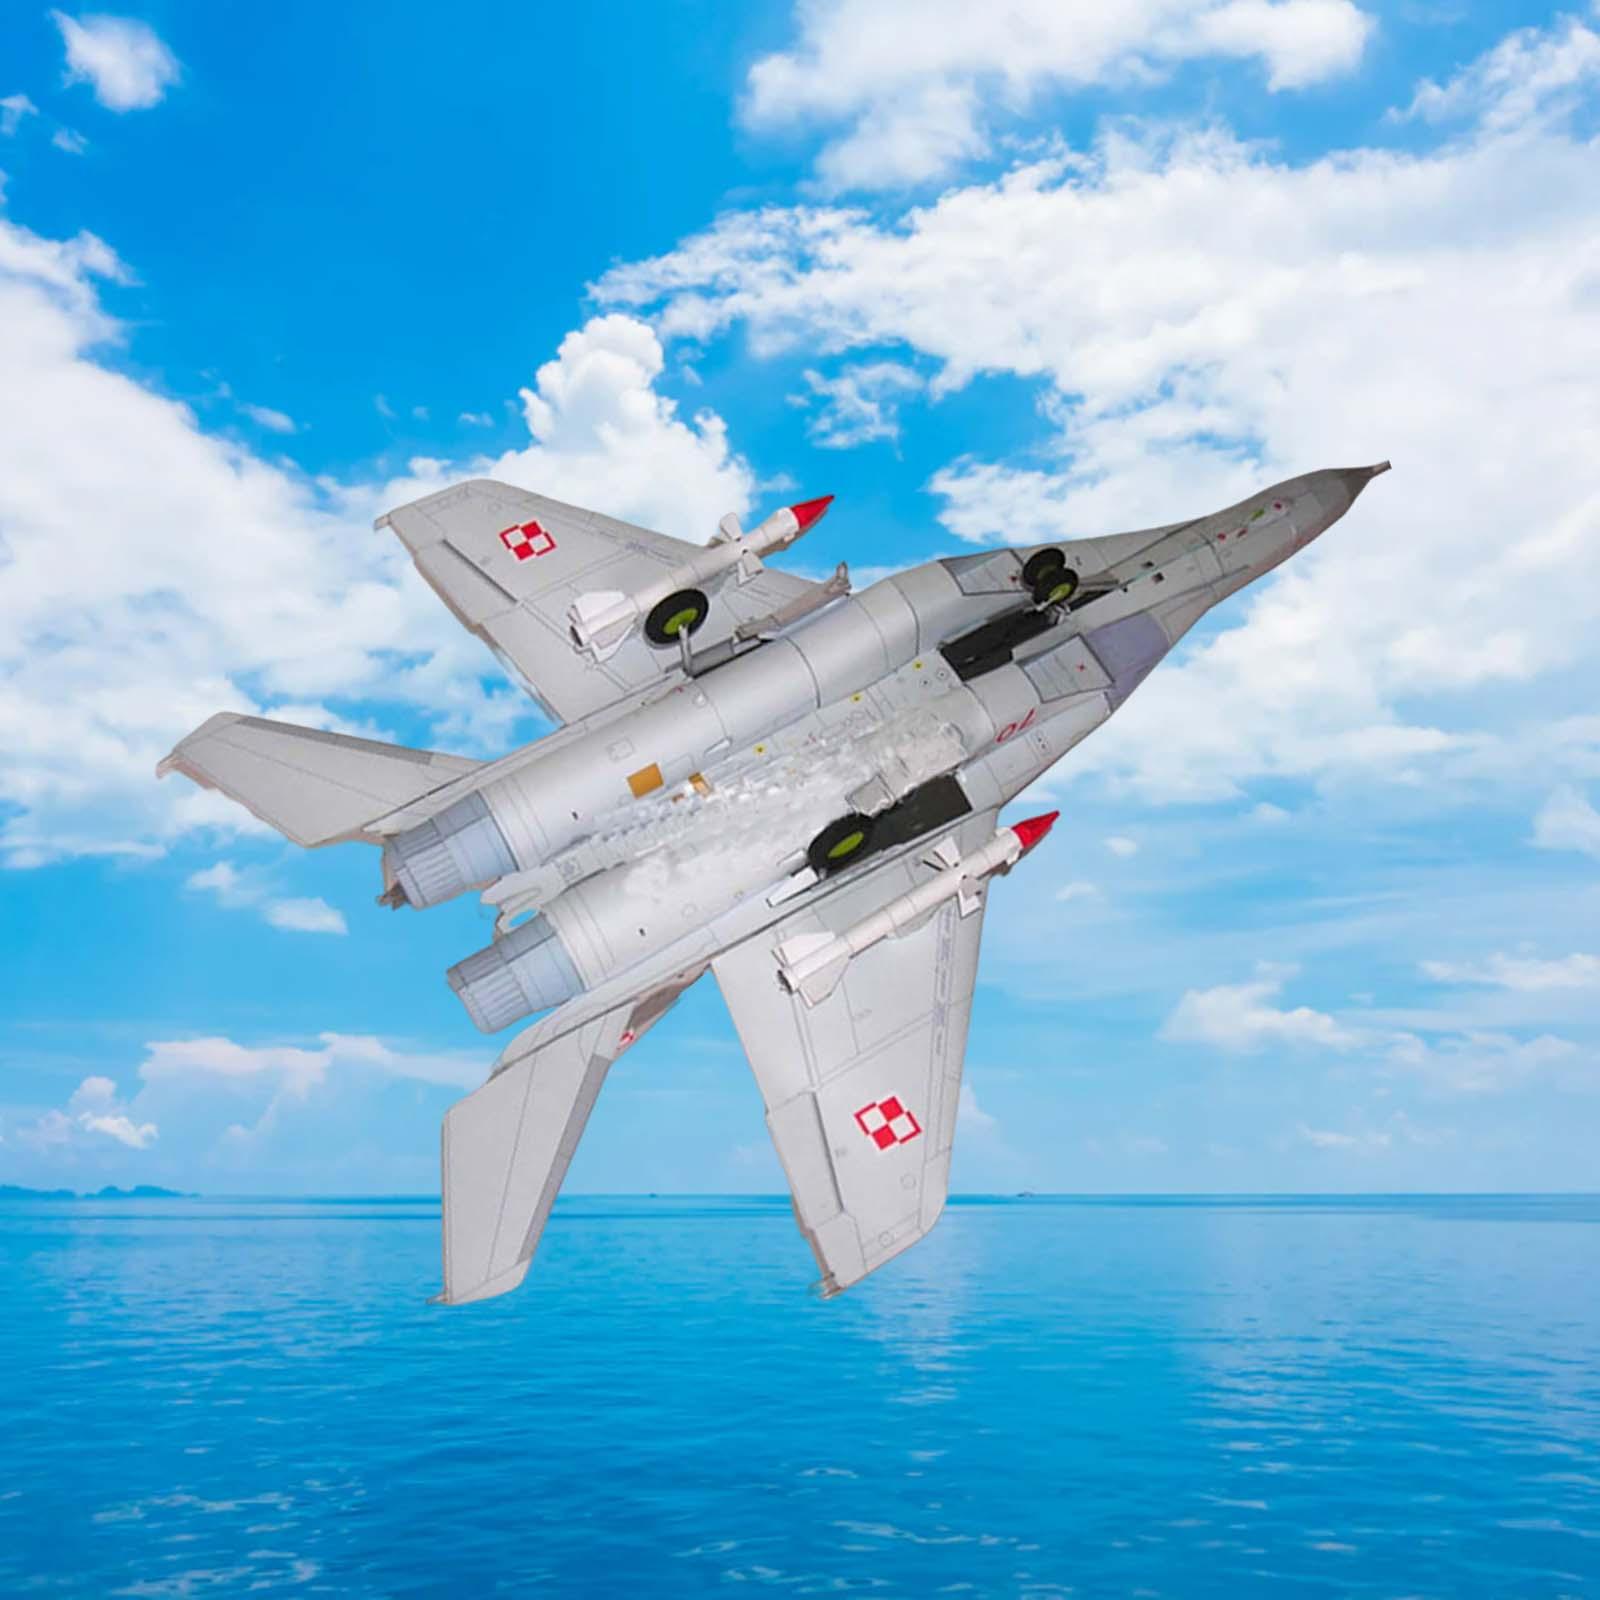 Paper Russian Plane Model Collectables Ornaments DIY Fighter Model Display Ornaments for Home Shelf Gift